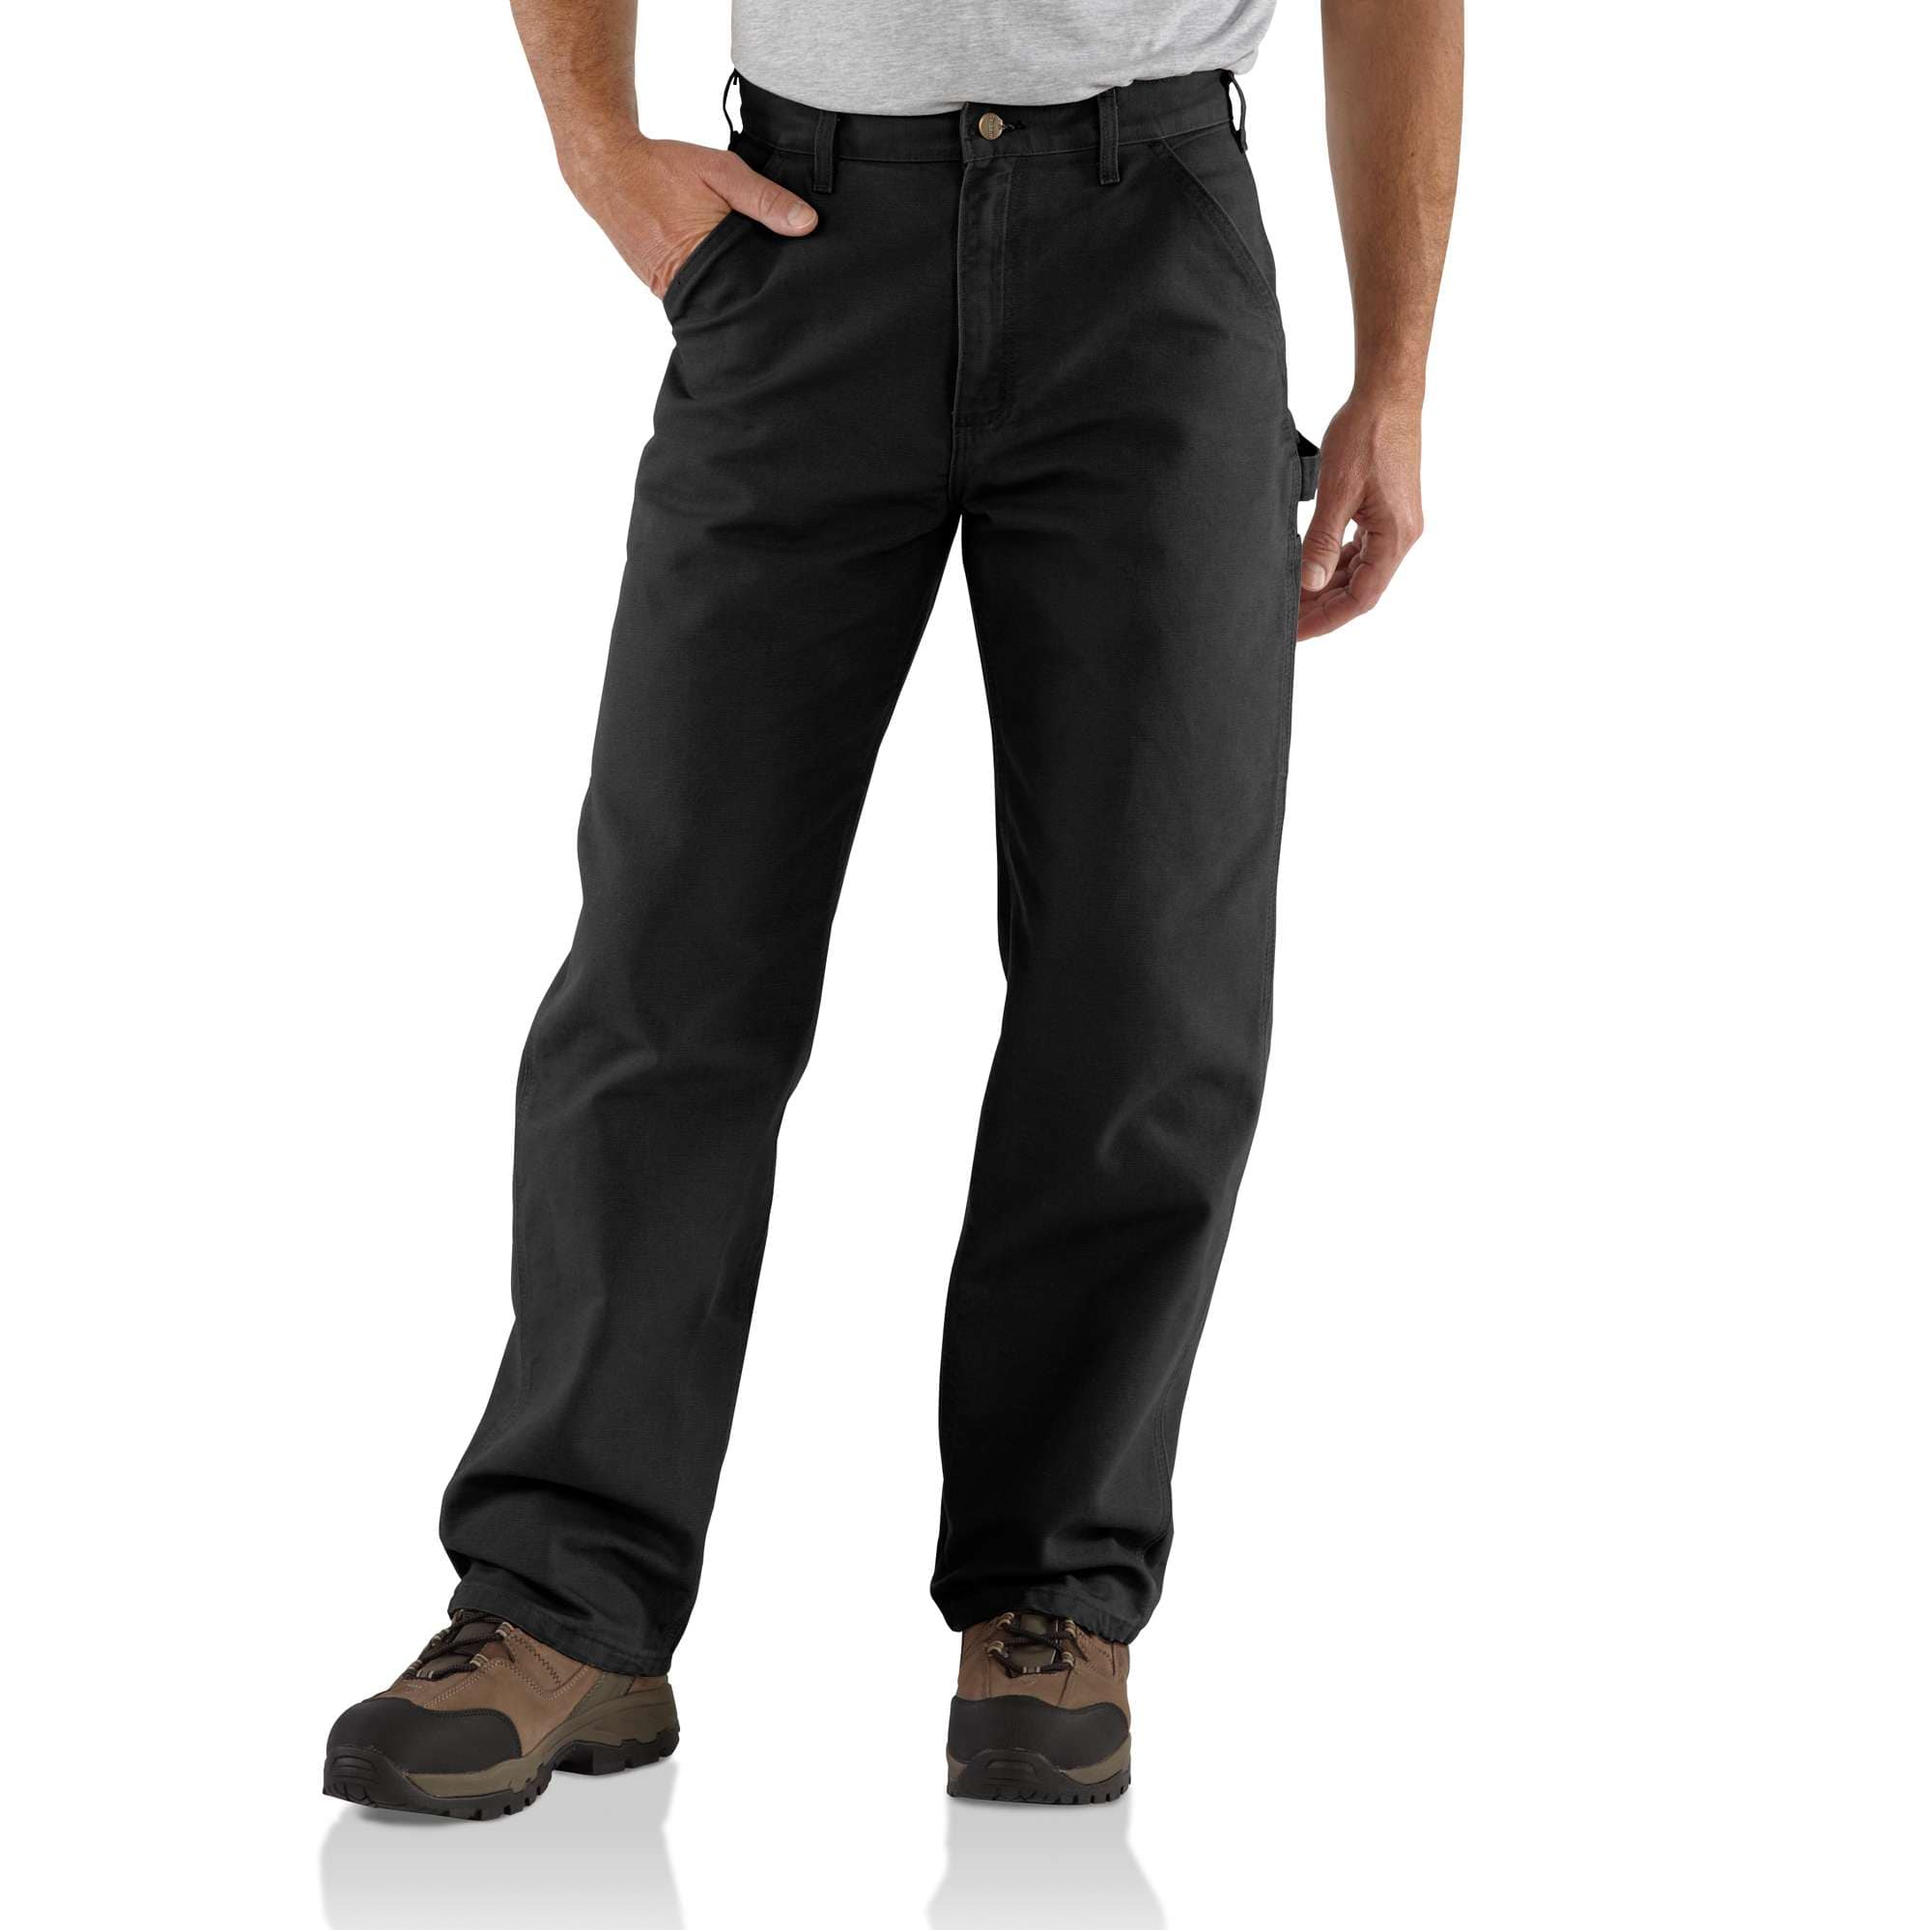 Loose Fit Washed Duck Utility Work Pant | Carhartt Company Gear